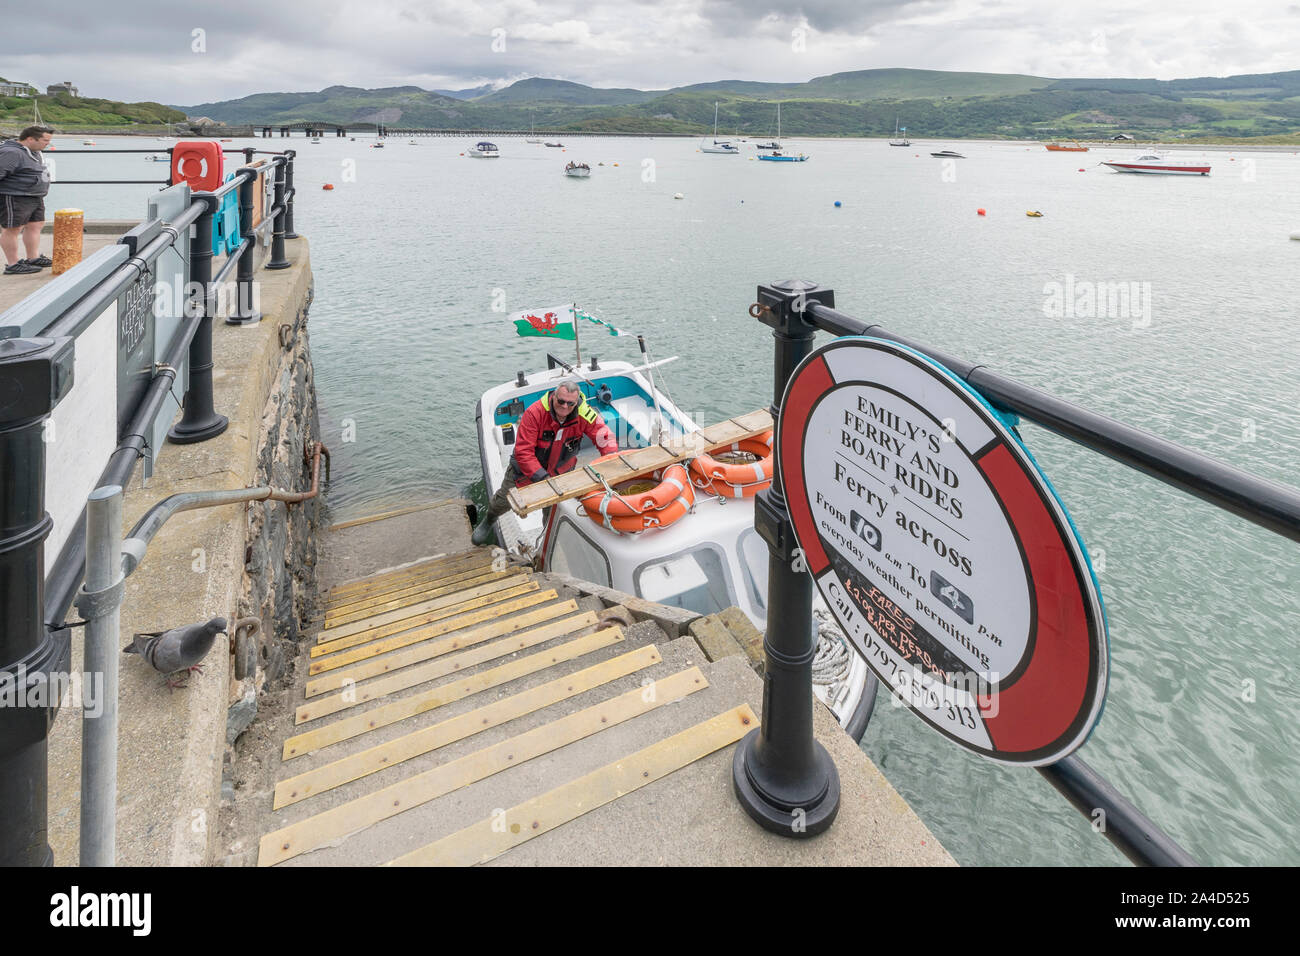 Emily's Ferry and boat rides crossing Barmouth Harbour in Gwynedd on the North Wales coast Cardigan Bay Stock Photo